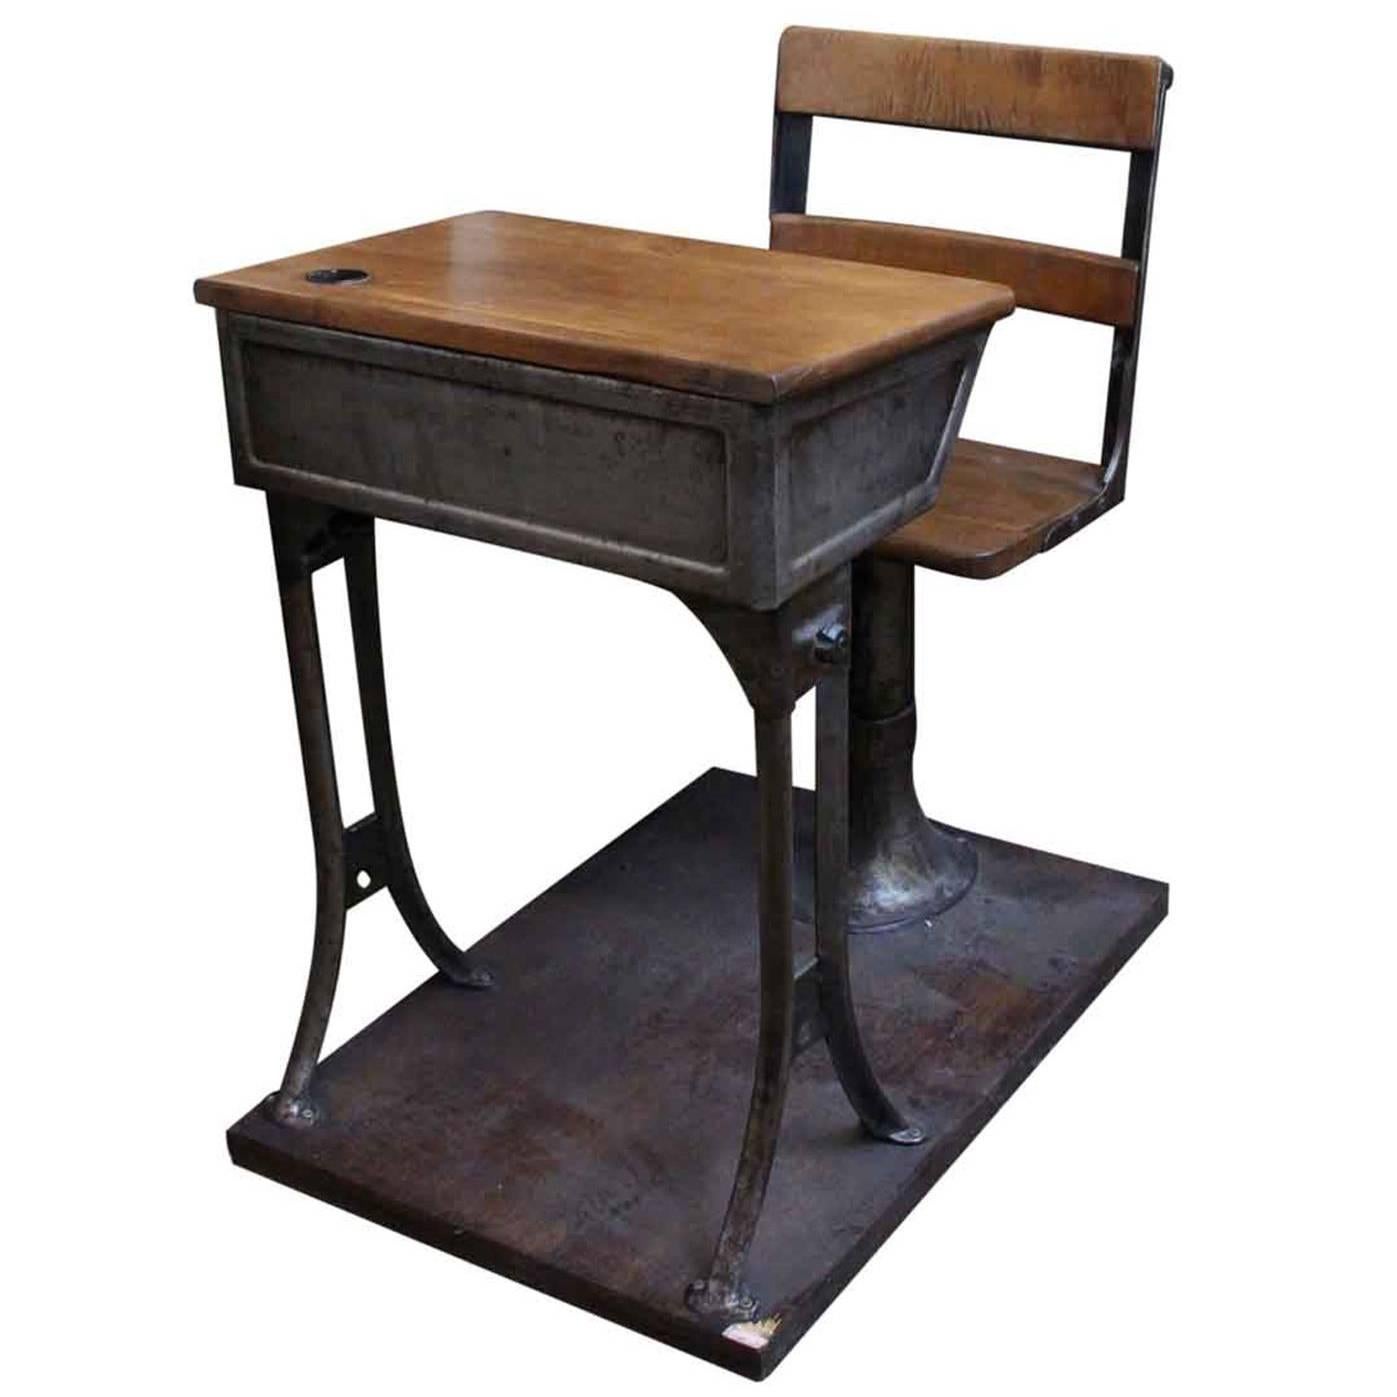 1930s Children's Adjustable School Desk in Wood and Cast Iron with Base